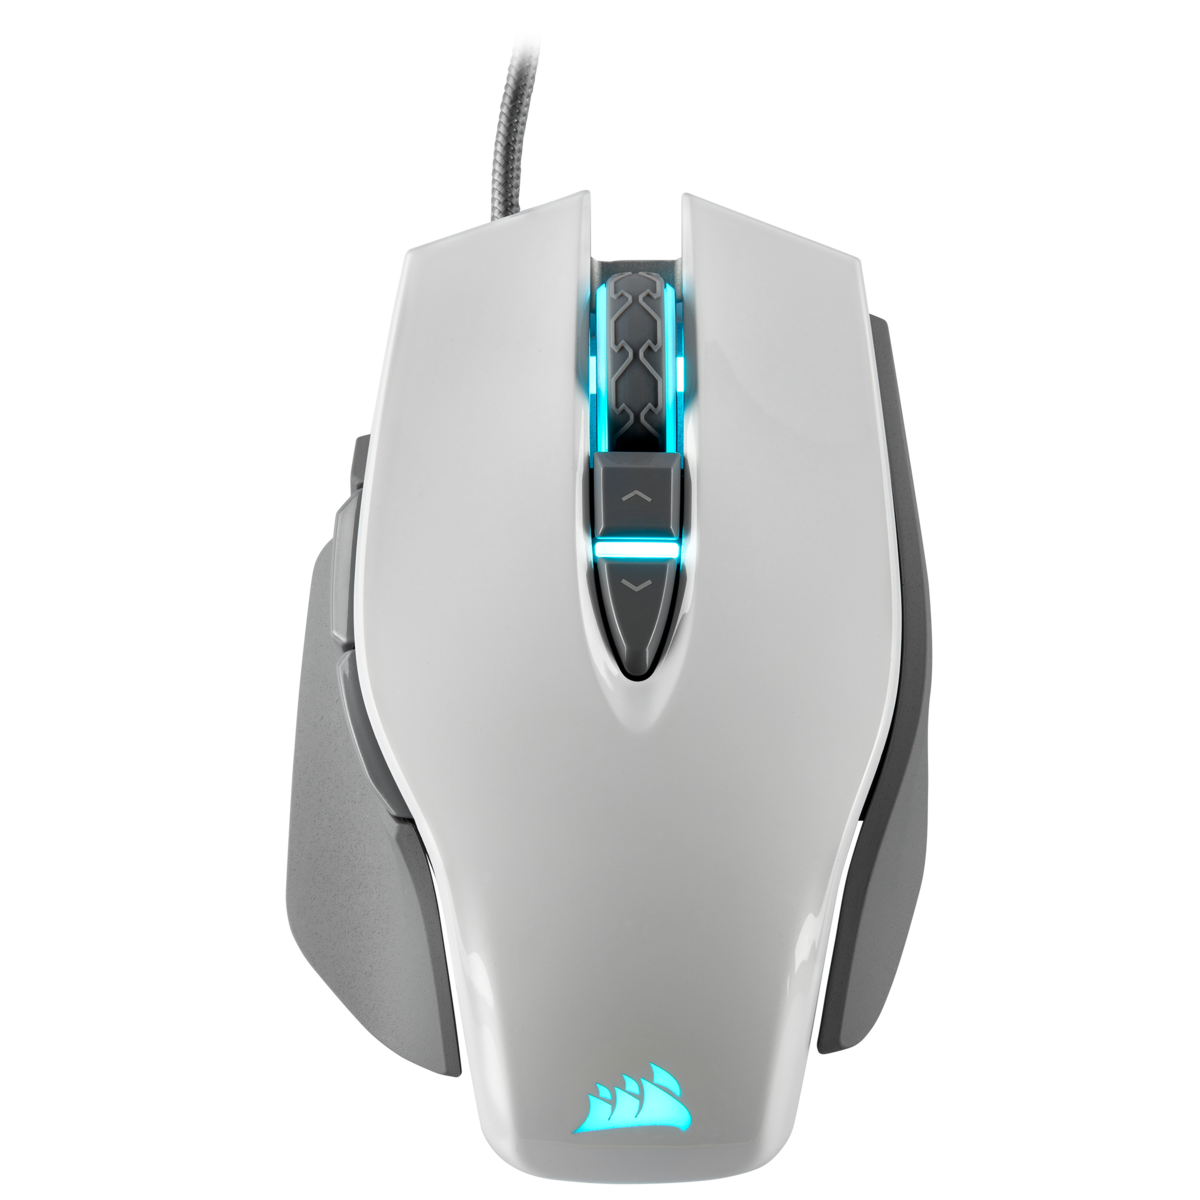 får generation tro Review: Corsair M65 RGB Elite tunable gaming mouse — Elite features at a  competitive price - NotebookCheck.net News